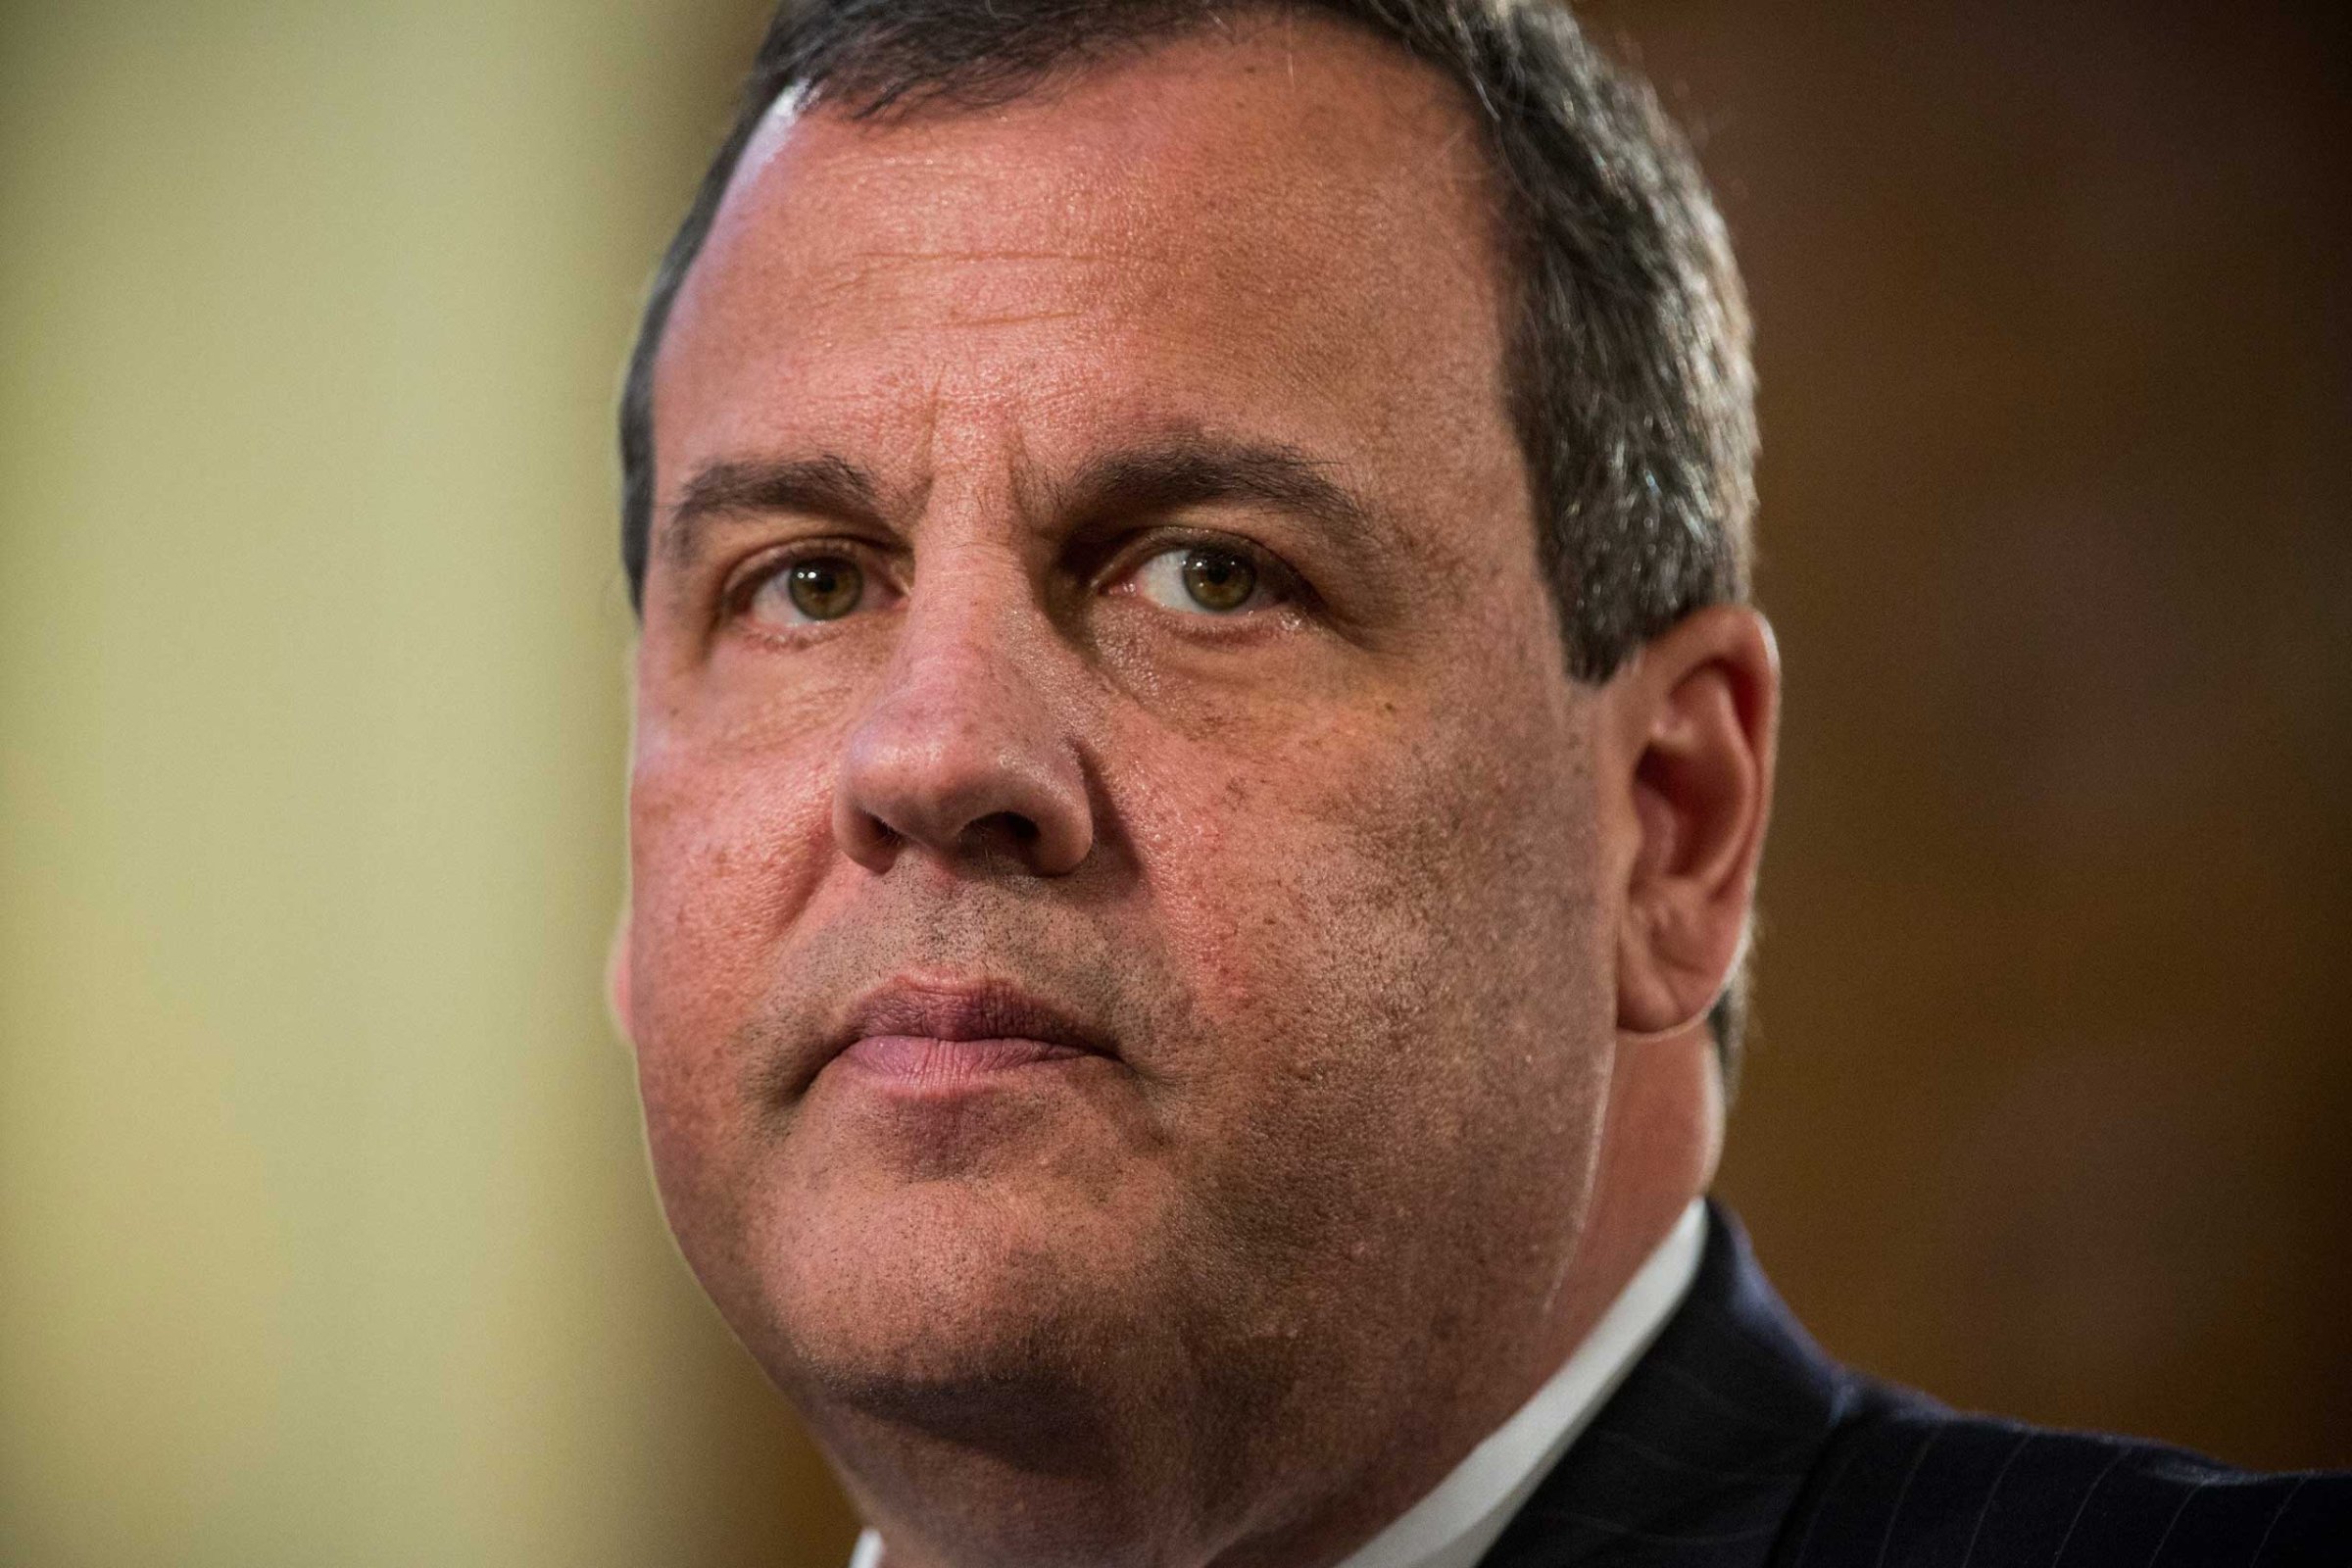 New Jersey Governor Chris Christie gives the annual State of the State address on Jan. 13, 2015 in Trenton, New Jersey.